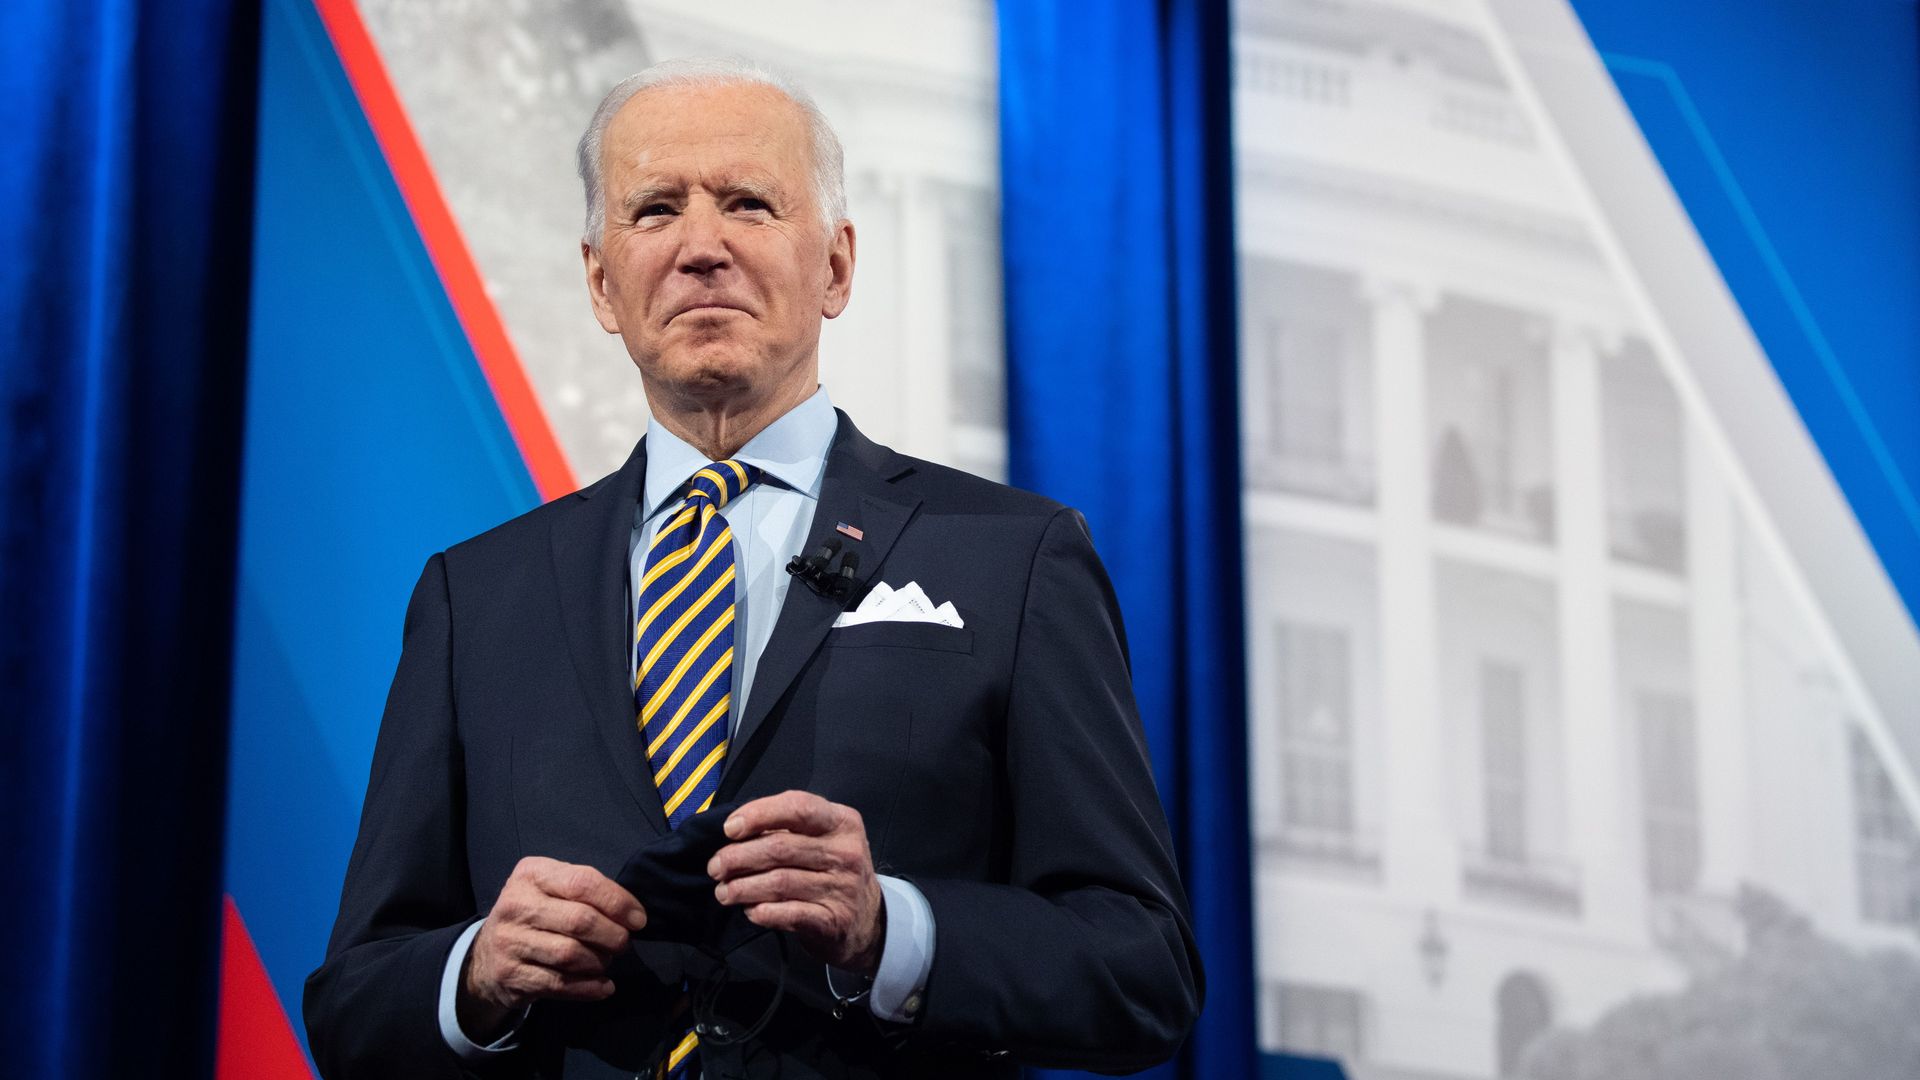 Joe Biden standing on a stage holding his face mask